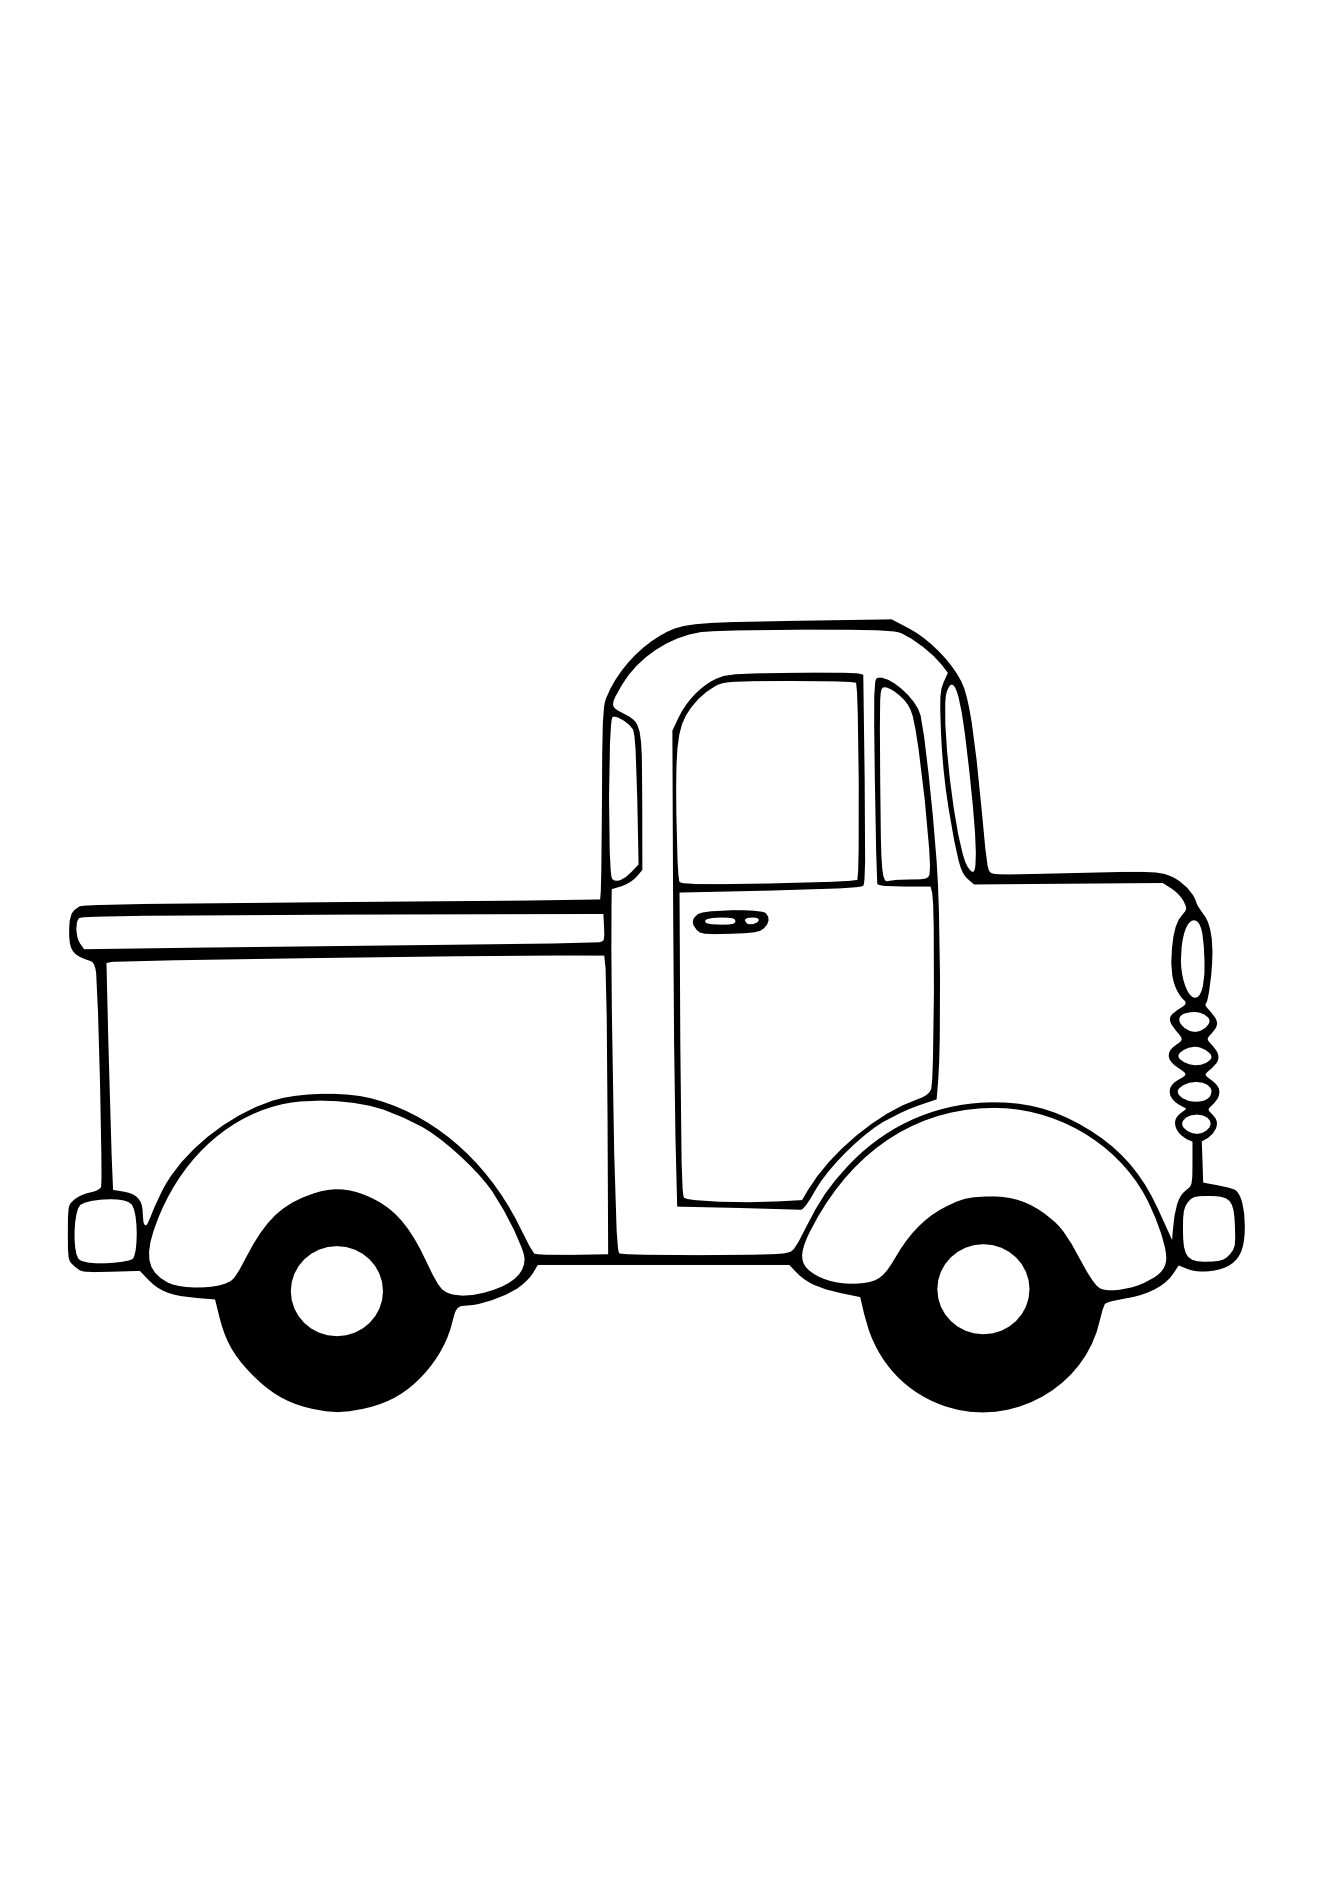 Monster Truck Clipart Black And White   Clipart Panda   Free Clipart